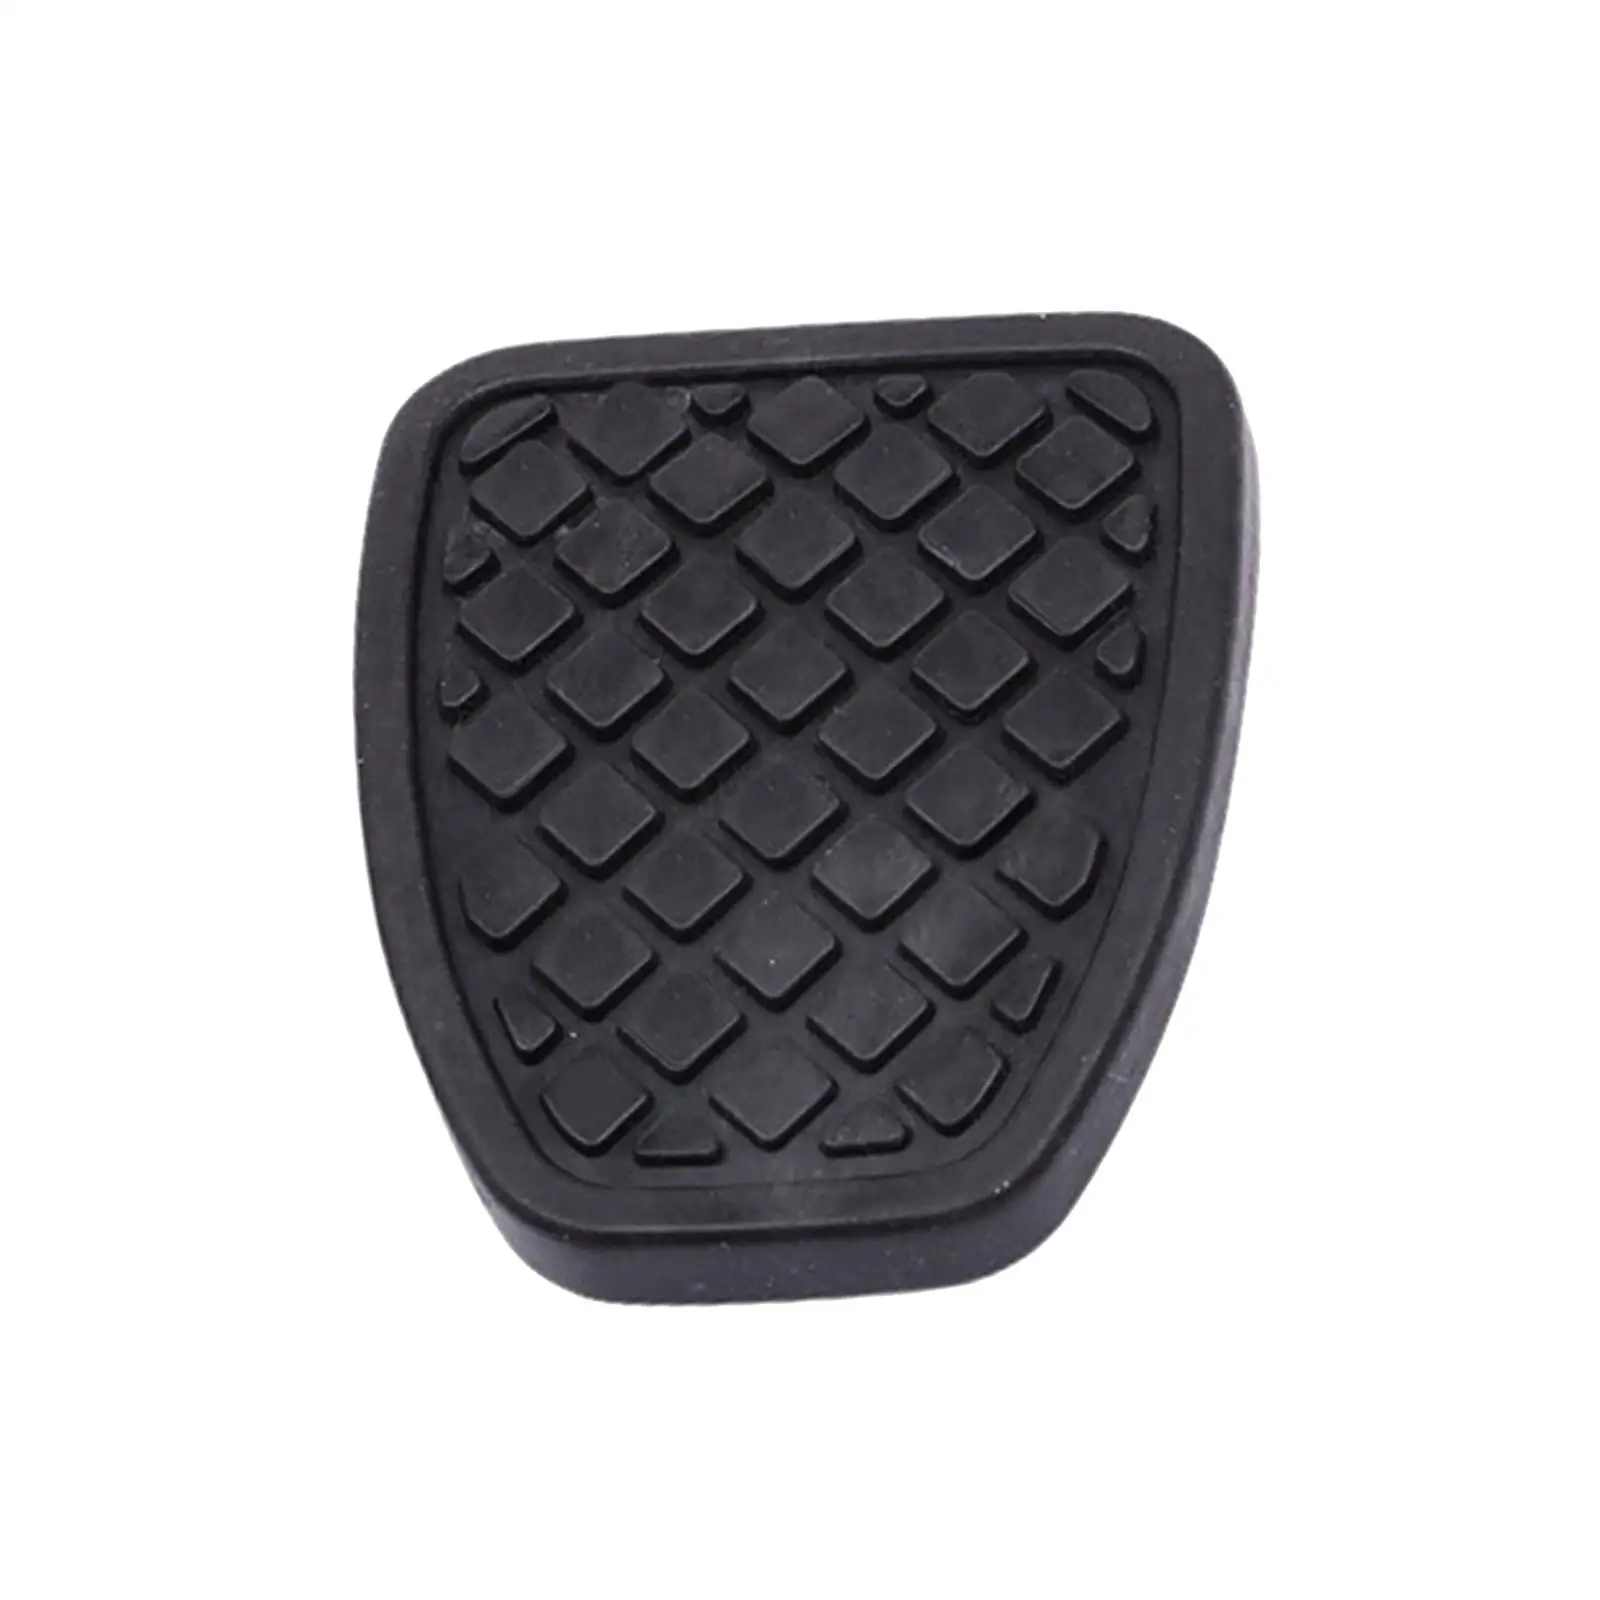 Rubber Brake Clutch Pedal Pad Durable Directly Replace Accessory 36015-ga111 for Subaru Legacy II III IV V Forester 1996-2017